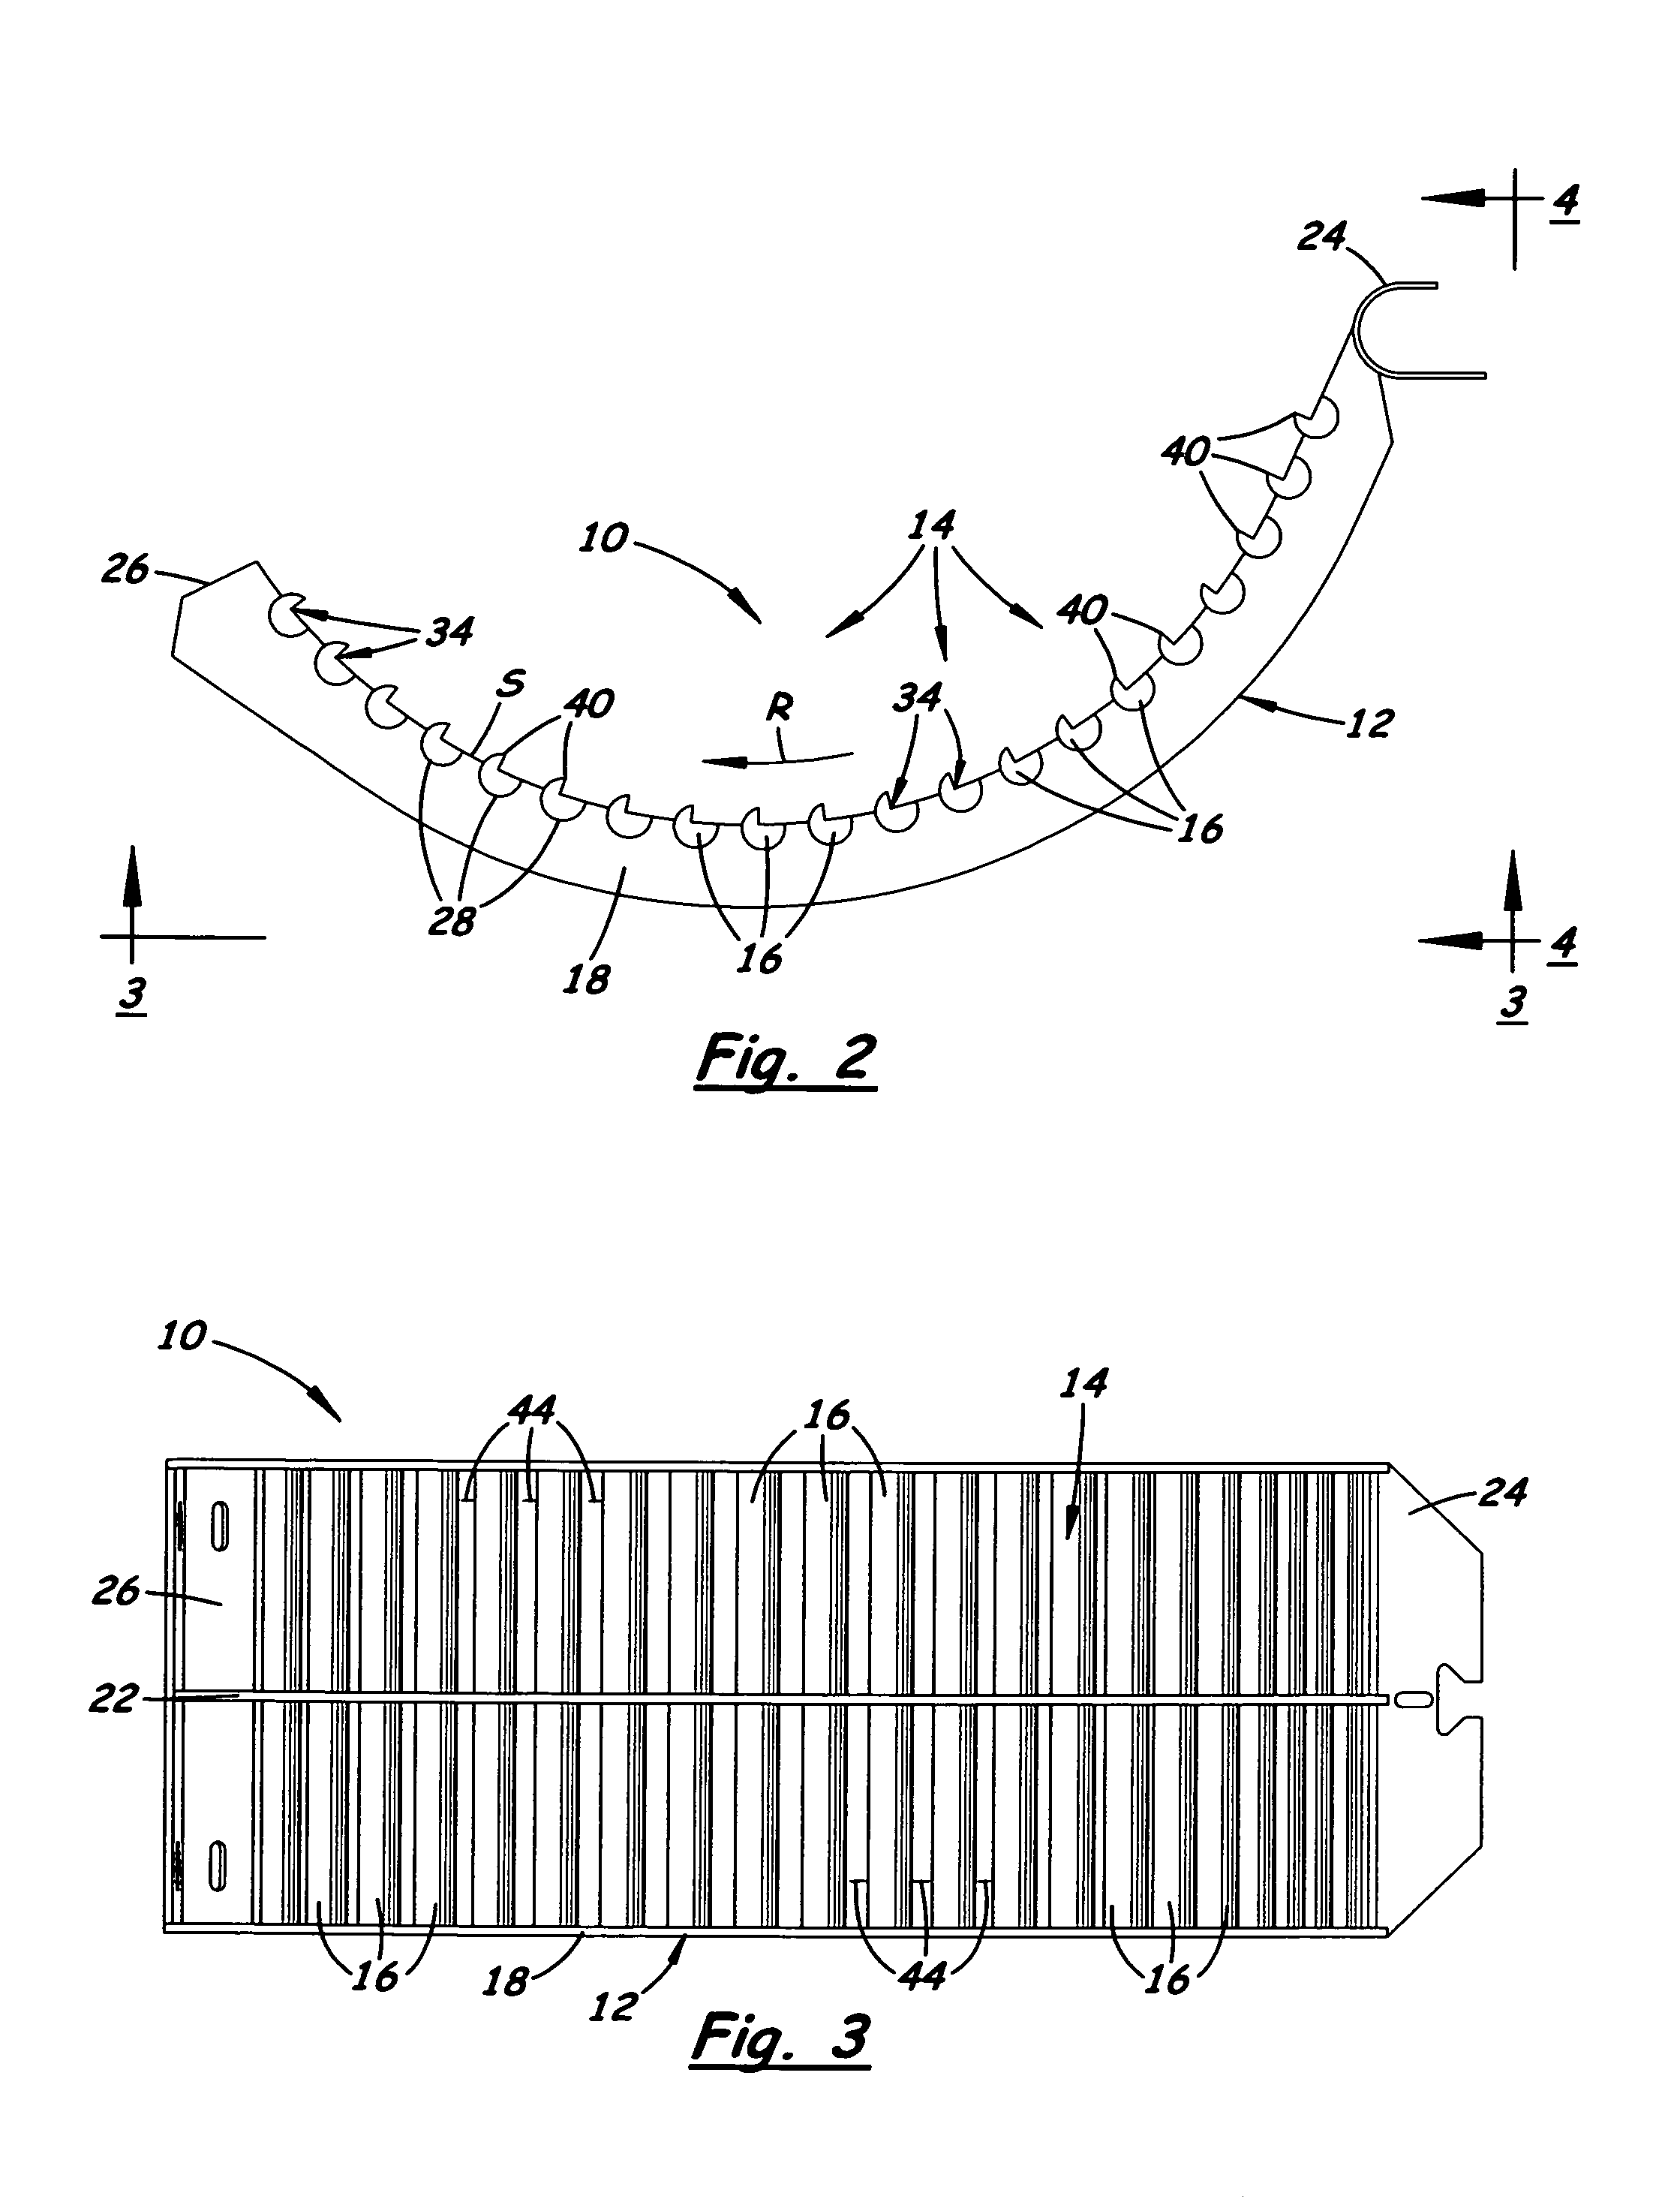 Longitudinally notched threshing element for an agricultural combine threshing concave